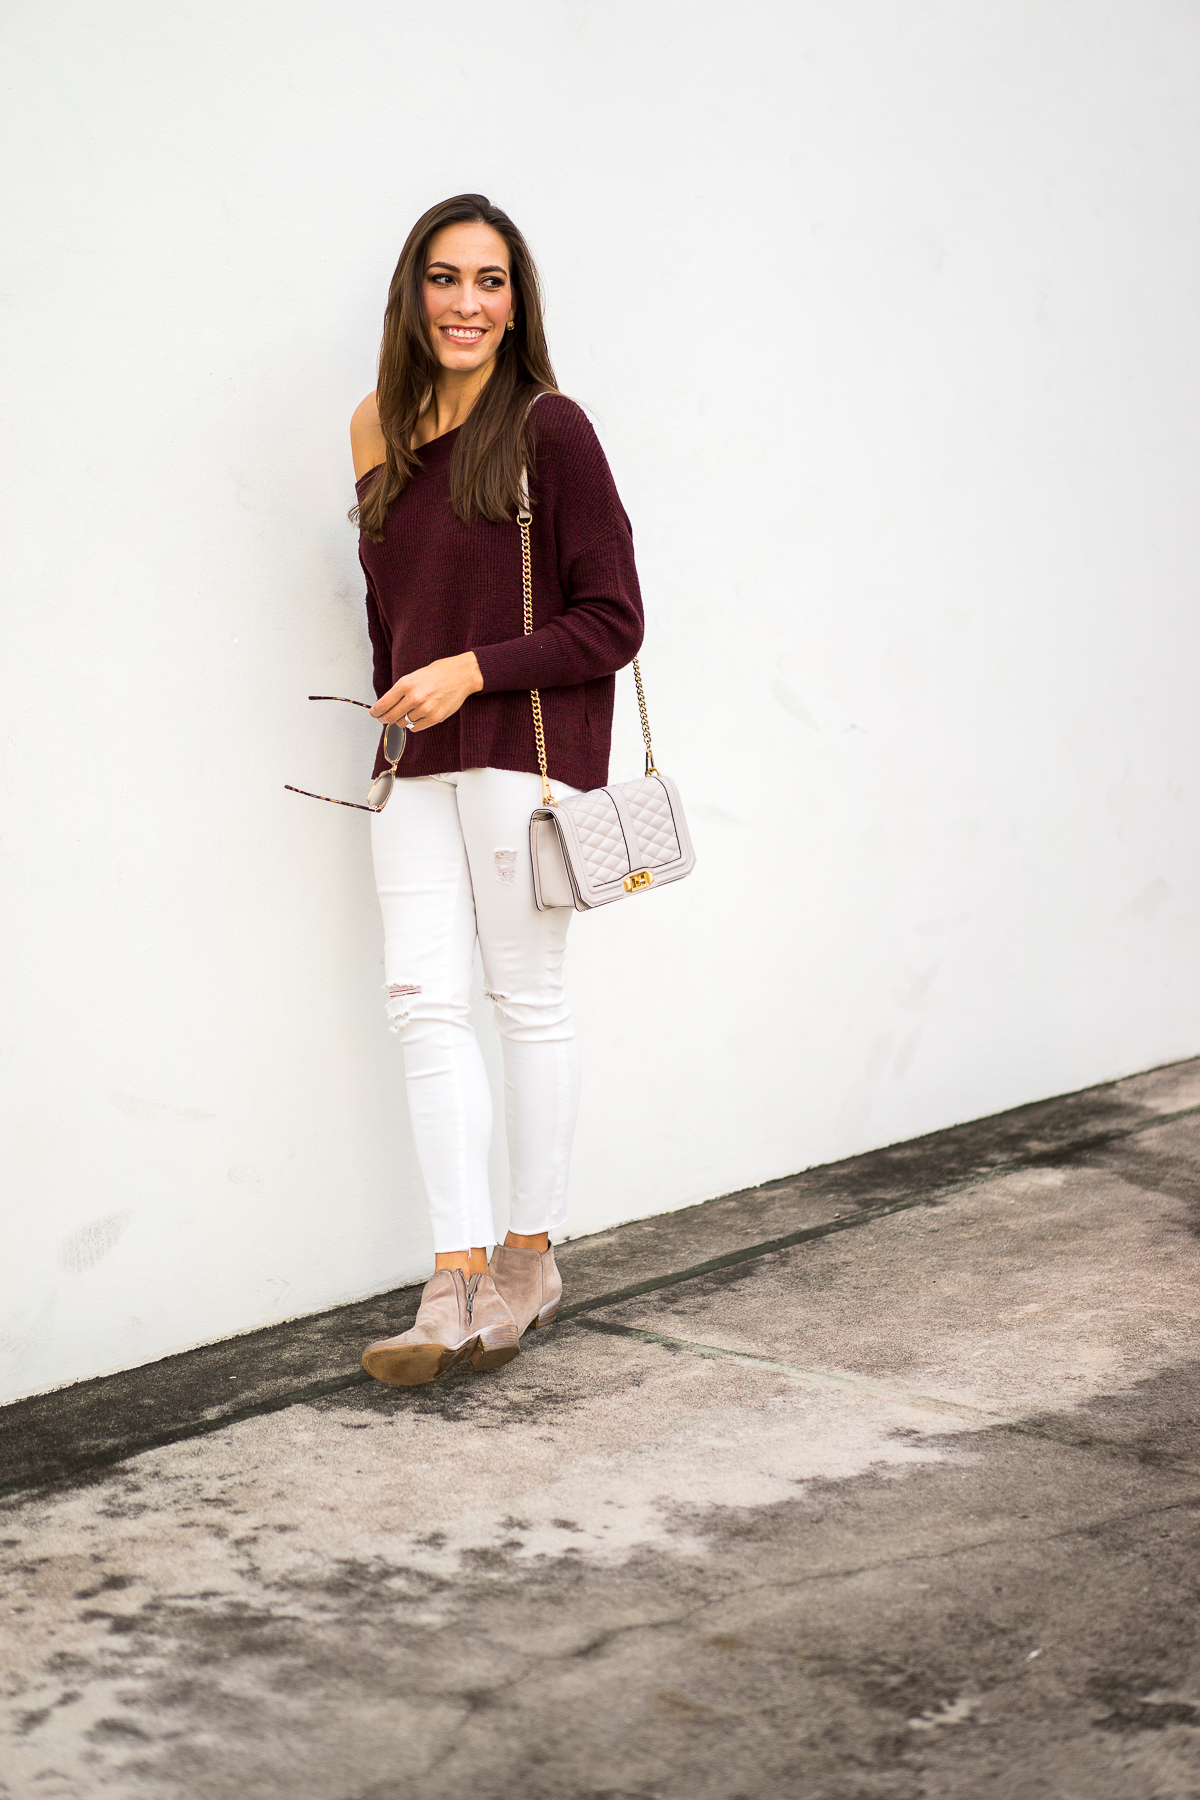 A Glam Lifestyle blogger Amanda Mercado in fall fashion favorites including Free People Alana slouchy dolman sleeve sweater and taupe ankle booties